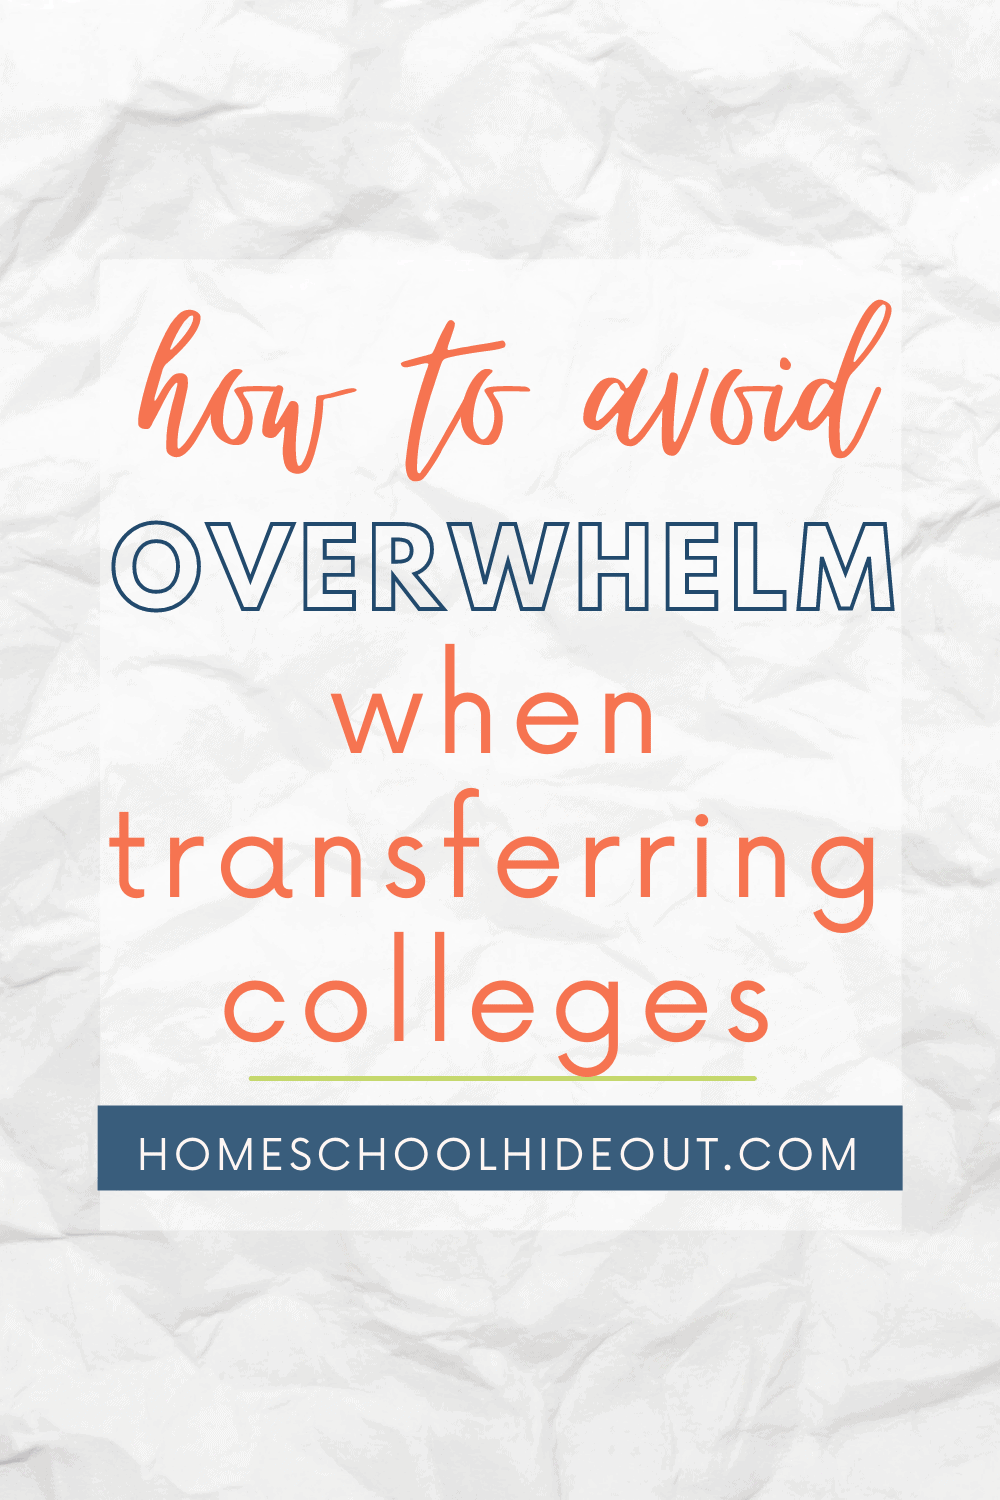 Transferring colleges is STRESSFUL but these tips can make it easier!